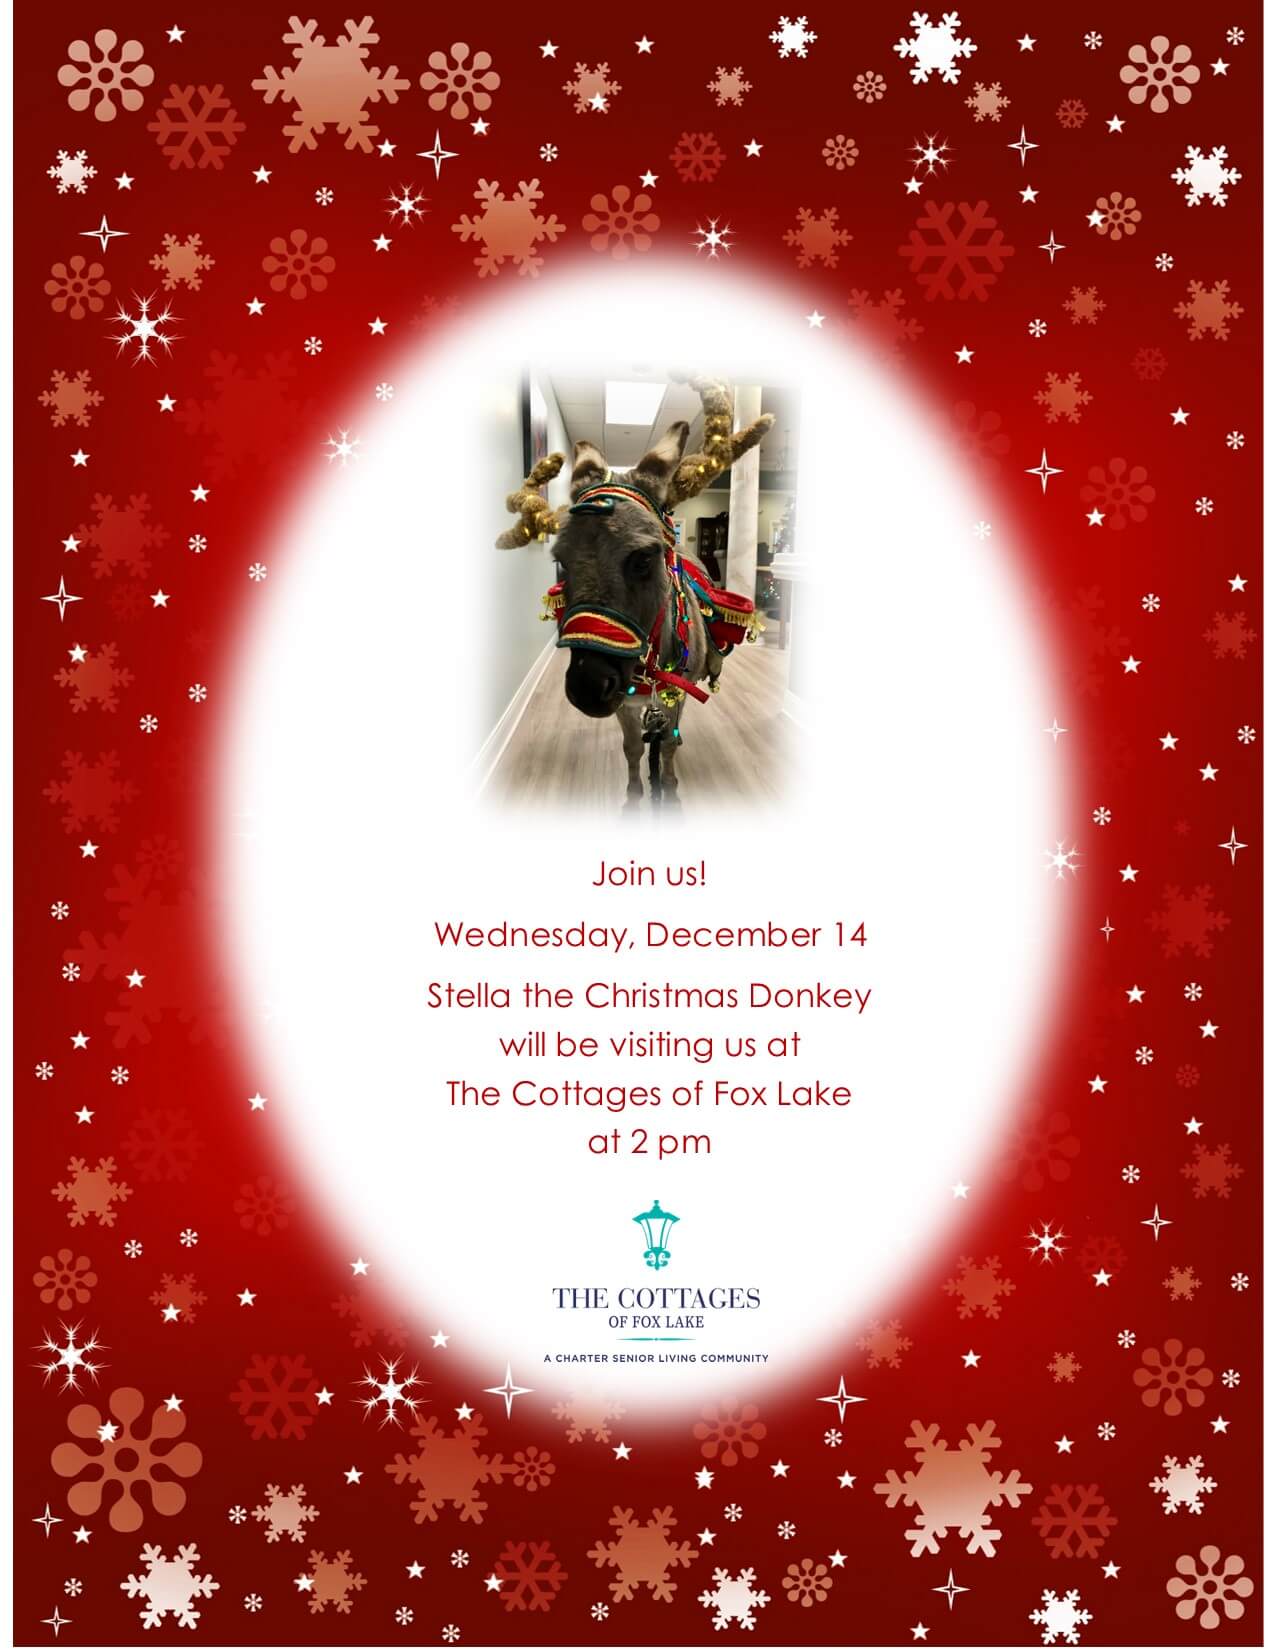 Cottages of Fox Lake - Assisted Living and Memory Care - Stella the Christmas Donkey